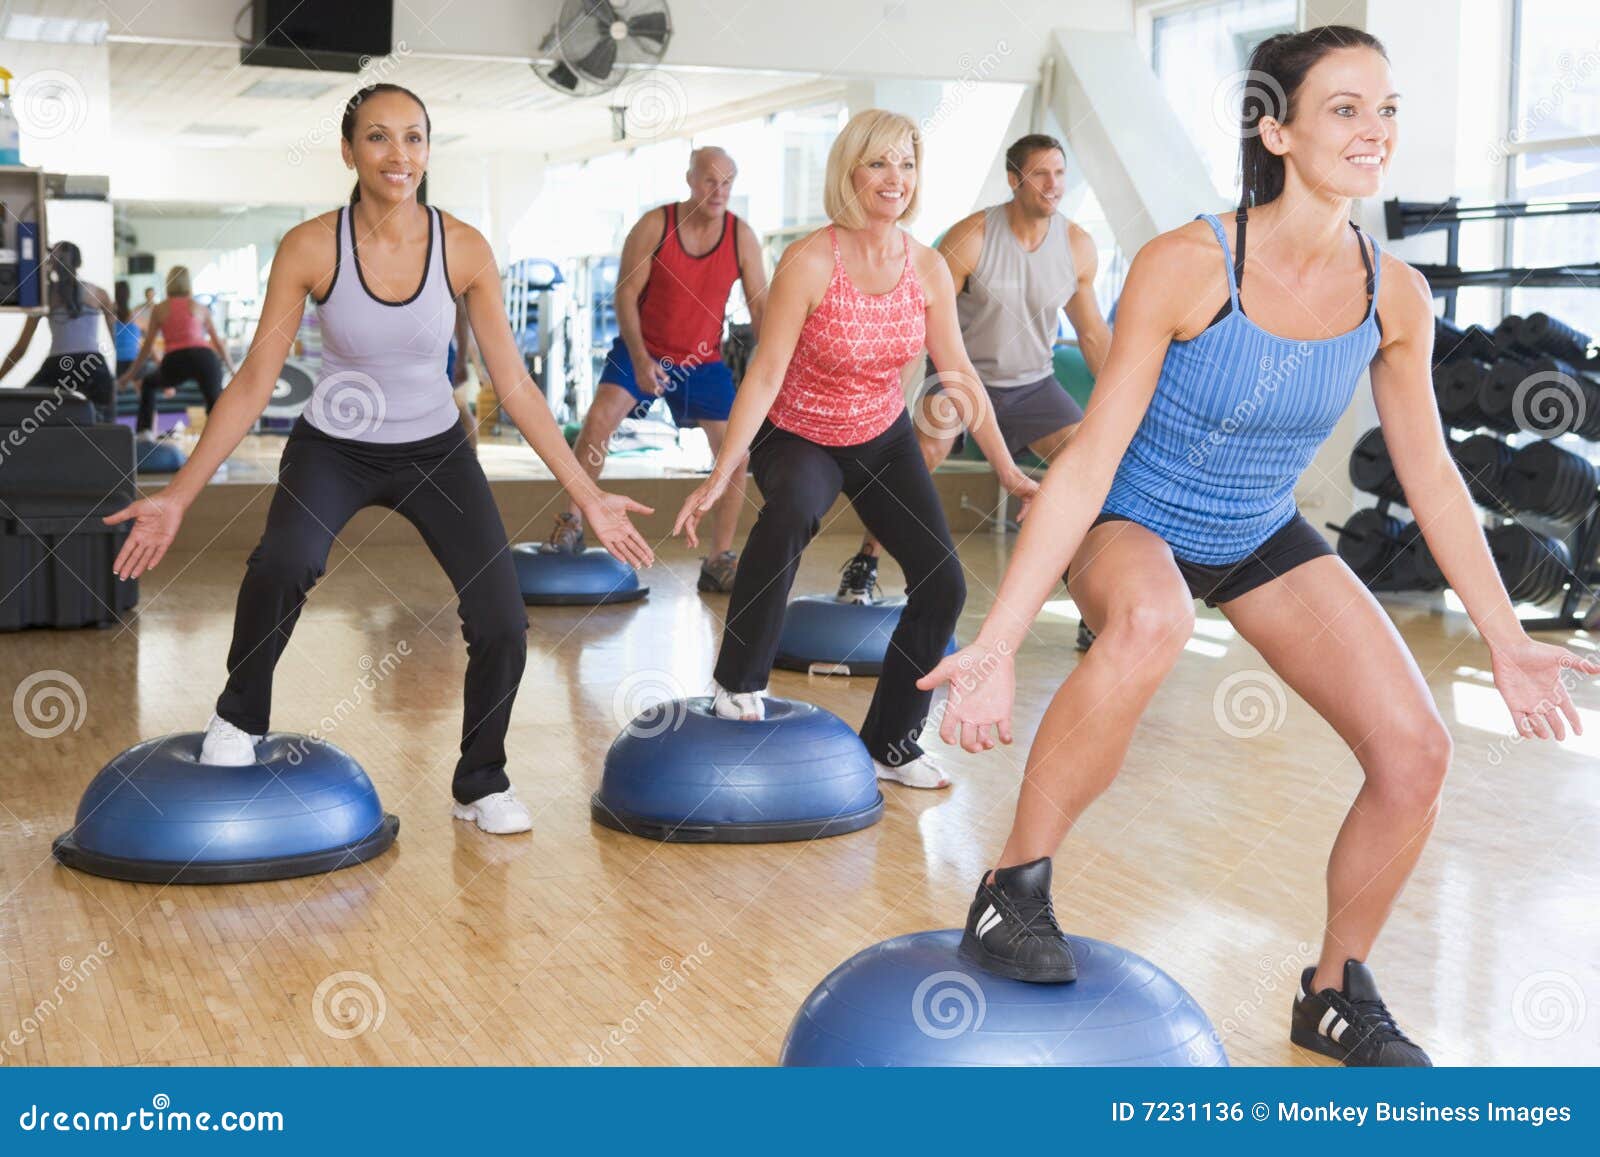 instructor taking exercise class at gym